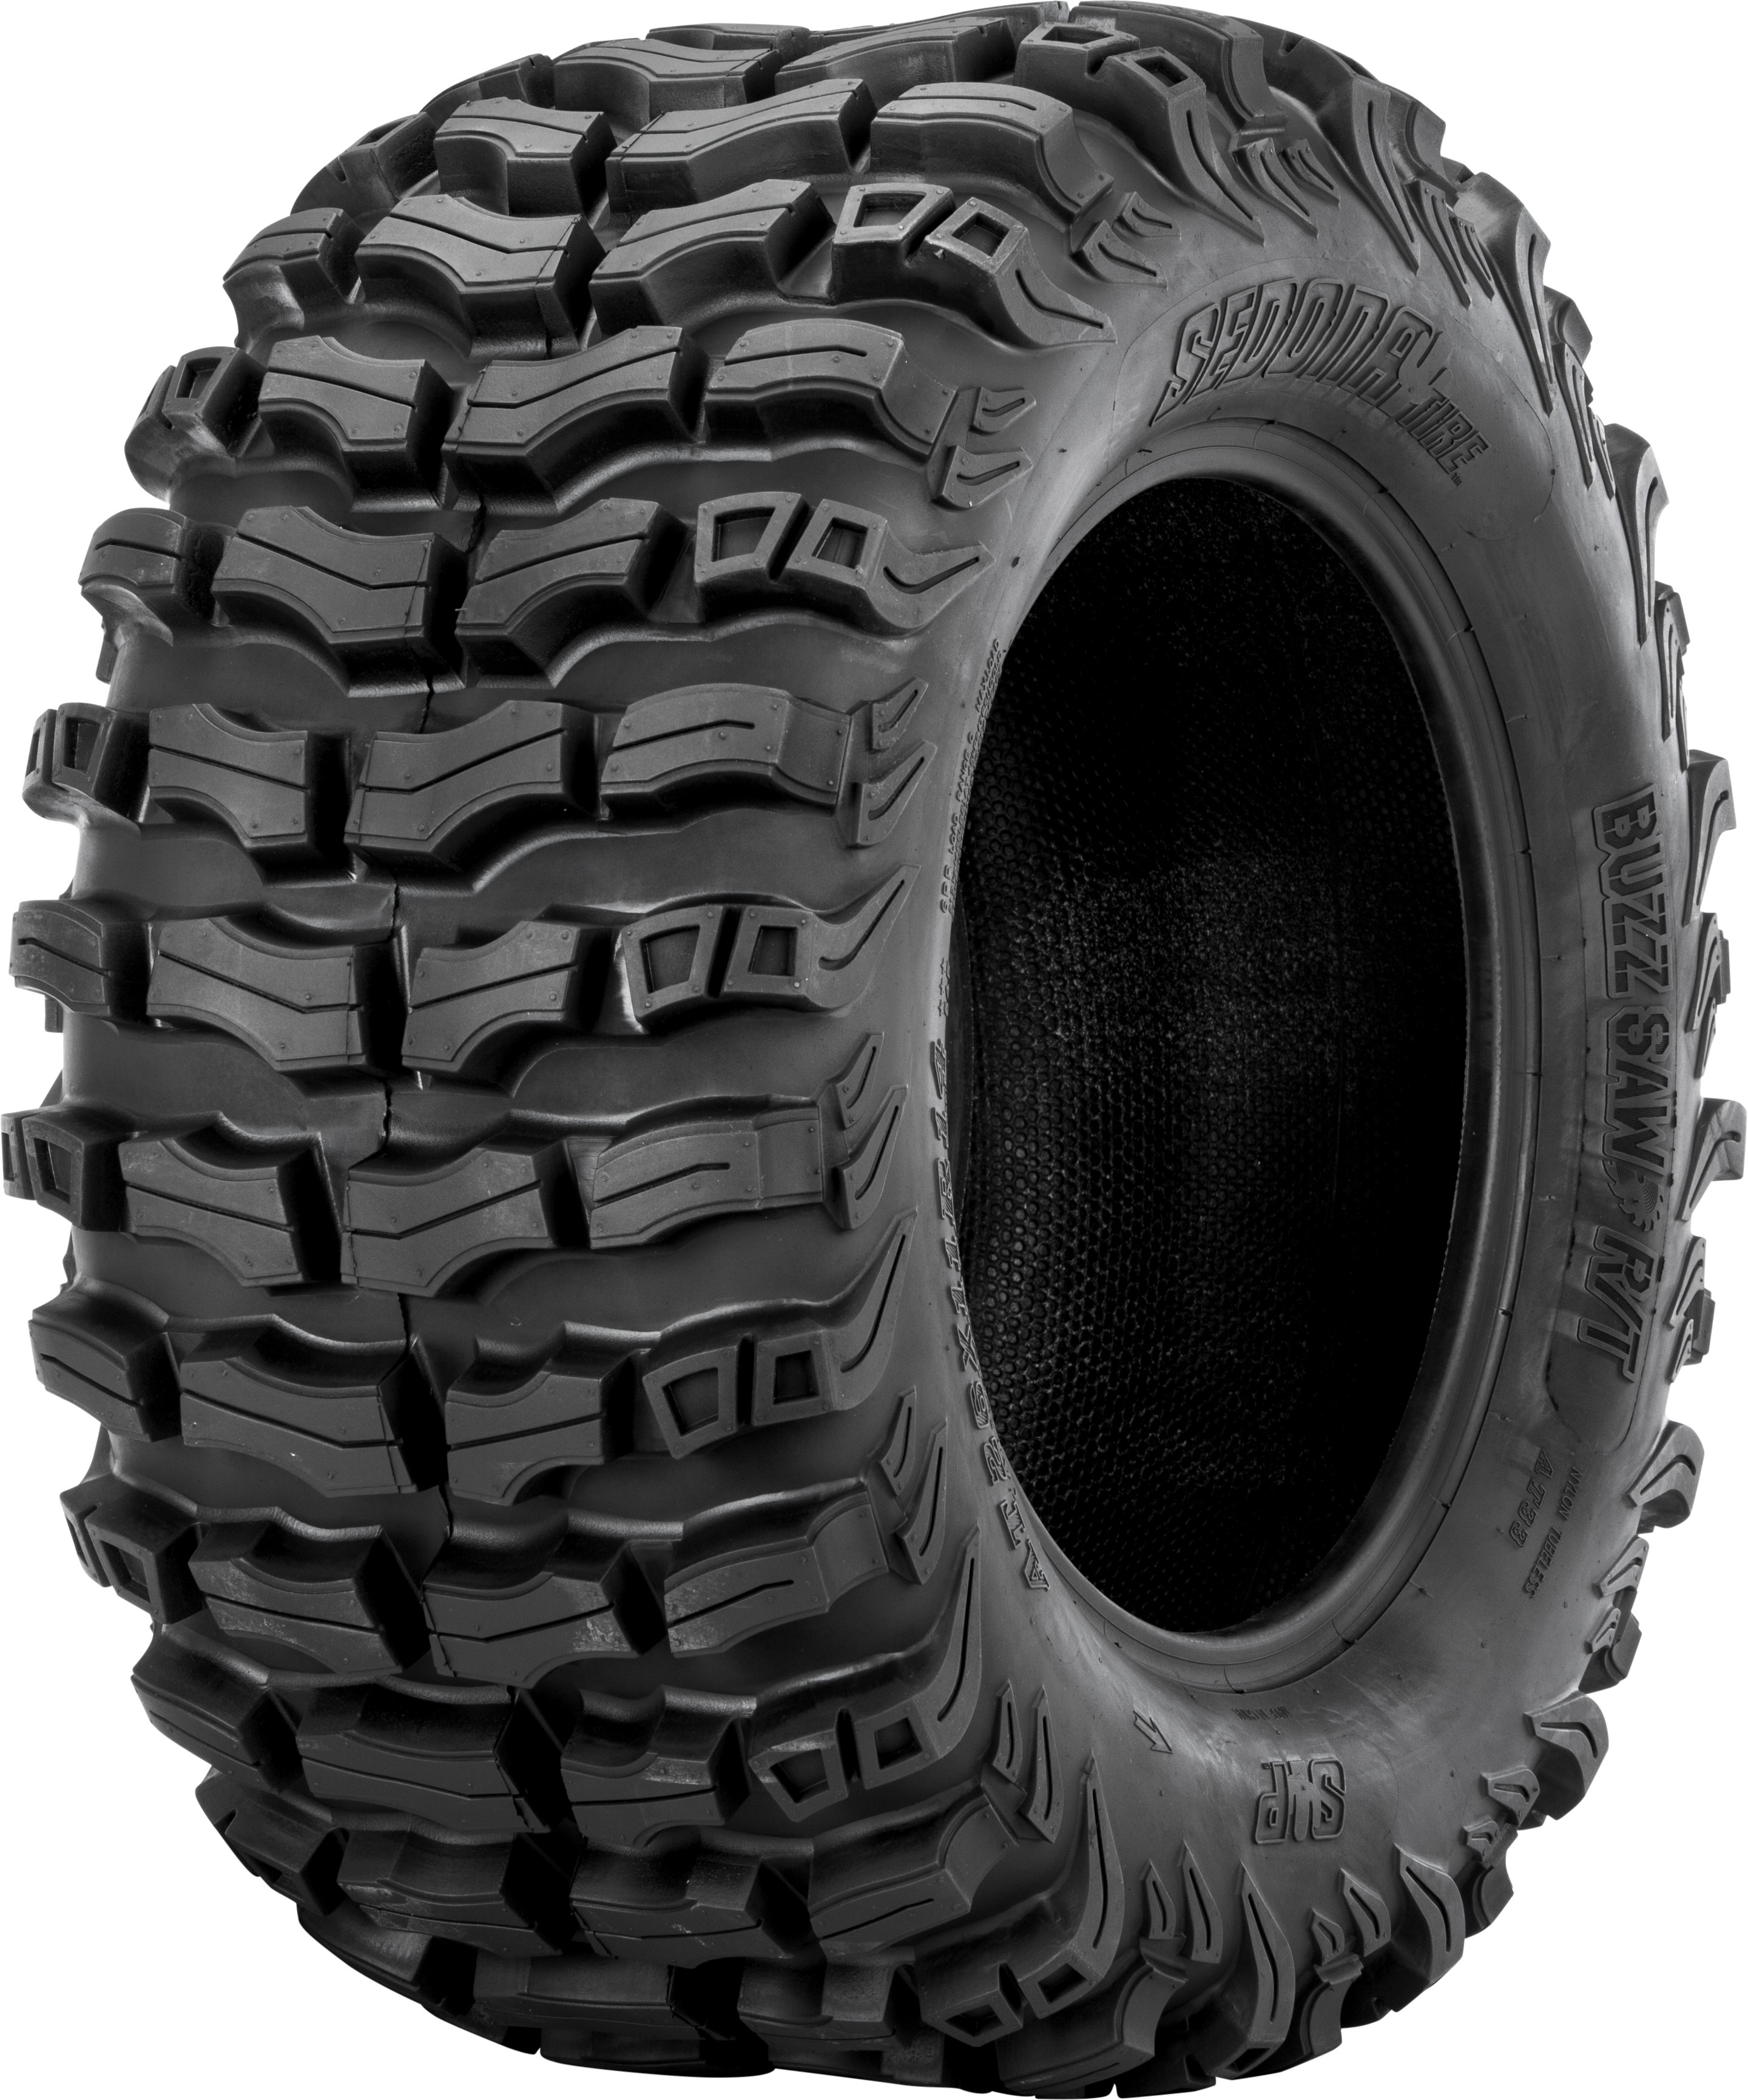 25X10Rx12 Buzz Saw R/T Tire - Click Image to Close